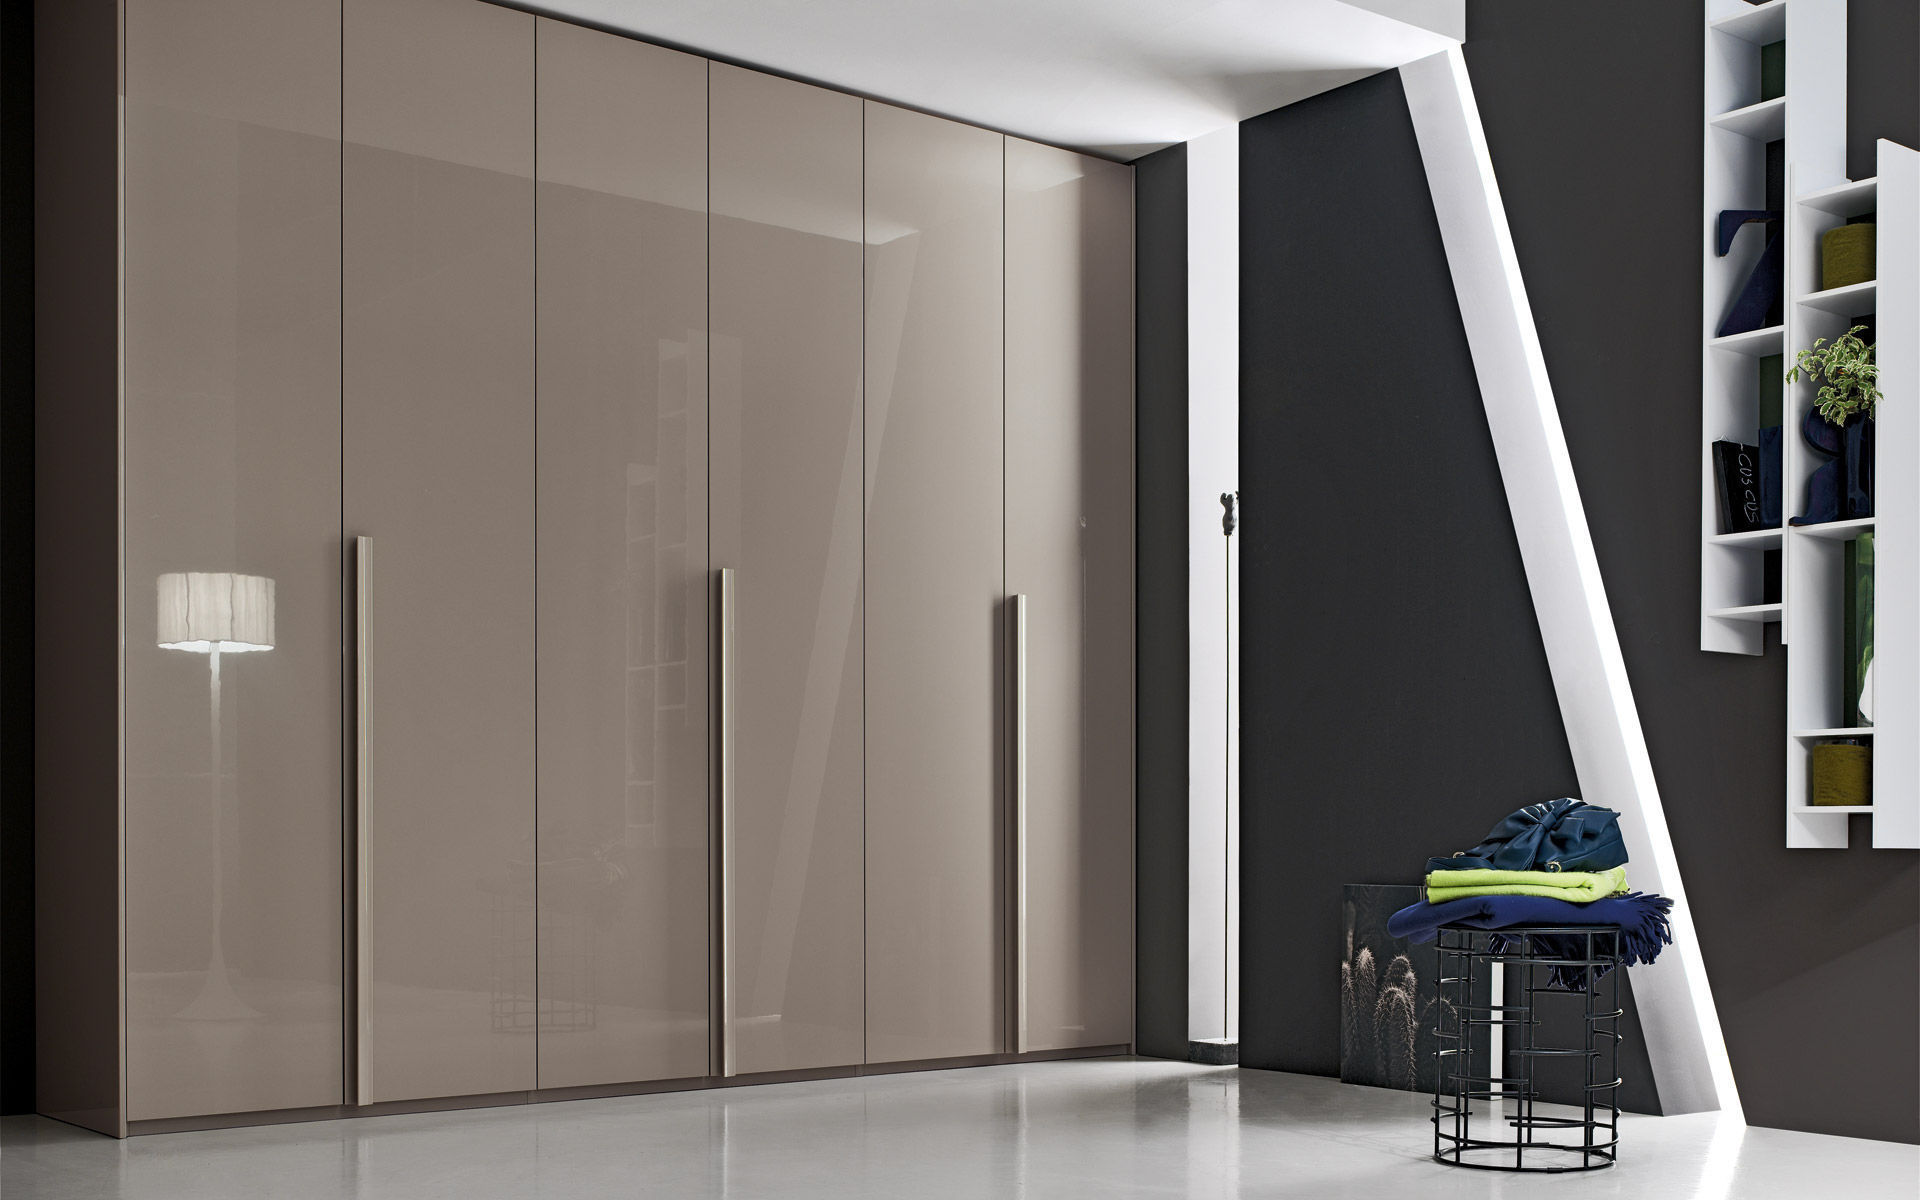 Choosing the Best Laminate for Your Wardrobe Inside?